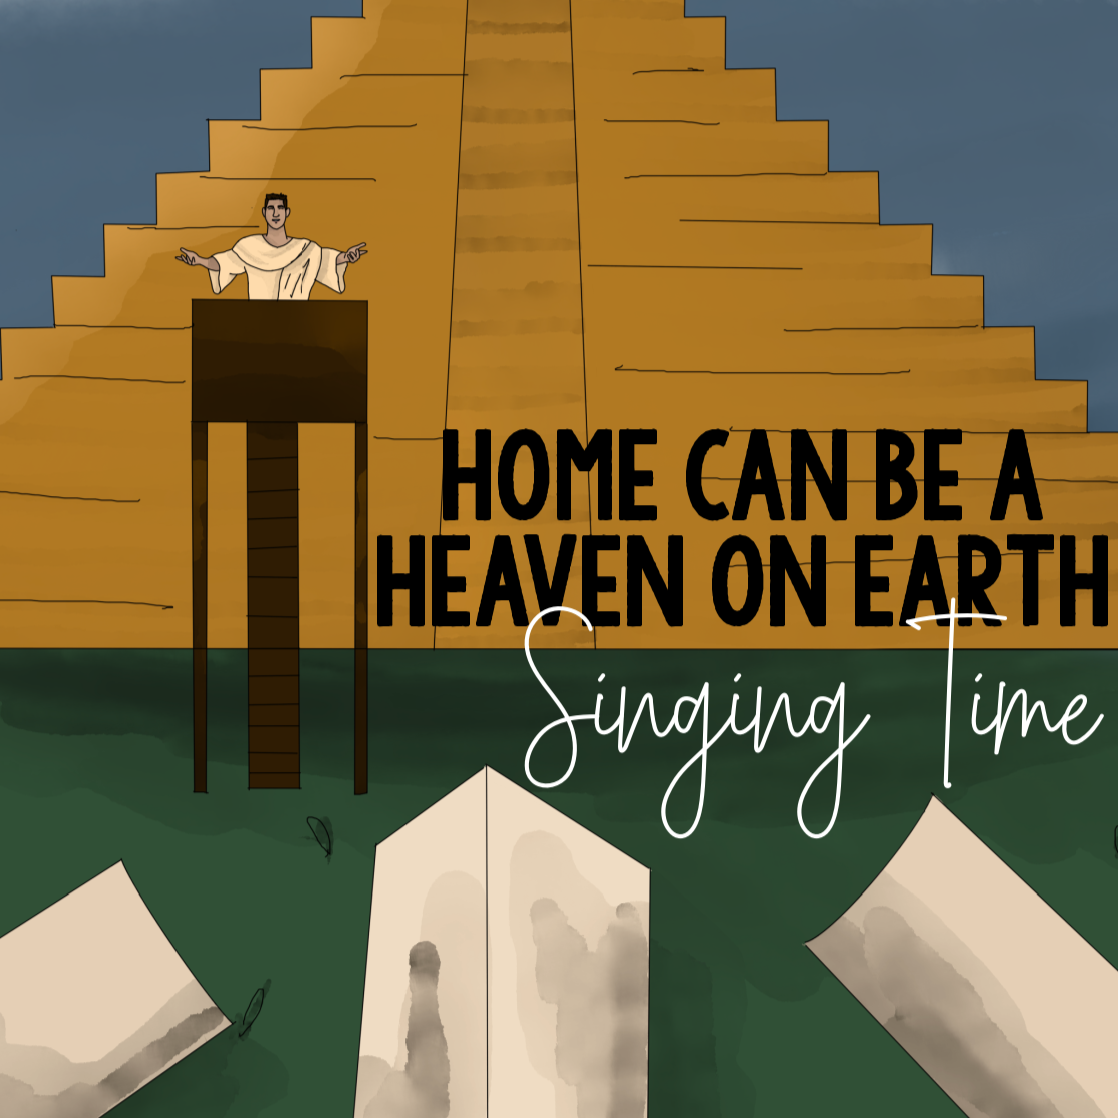 Teach Home Can Be a Heaven on Earth with these fun and engaging Singing Time Ideas for LDS Primary Music Leaders - a fun assortment of activities and lesson plans.